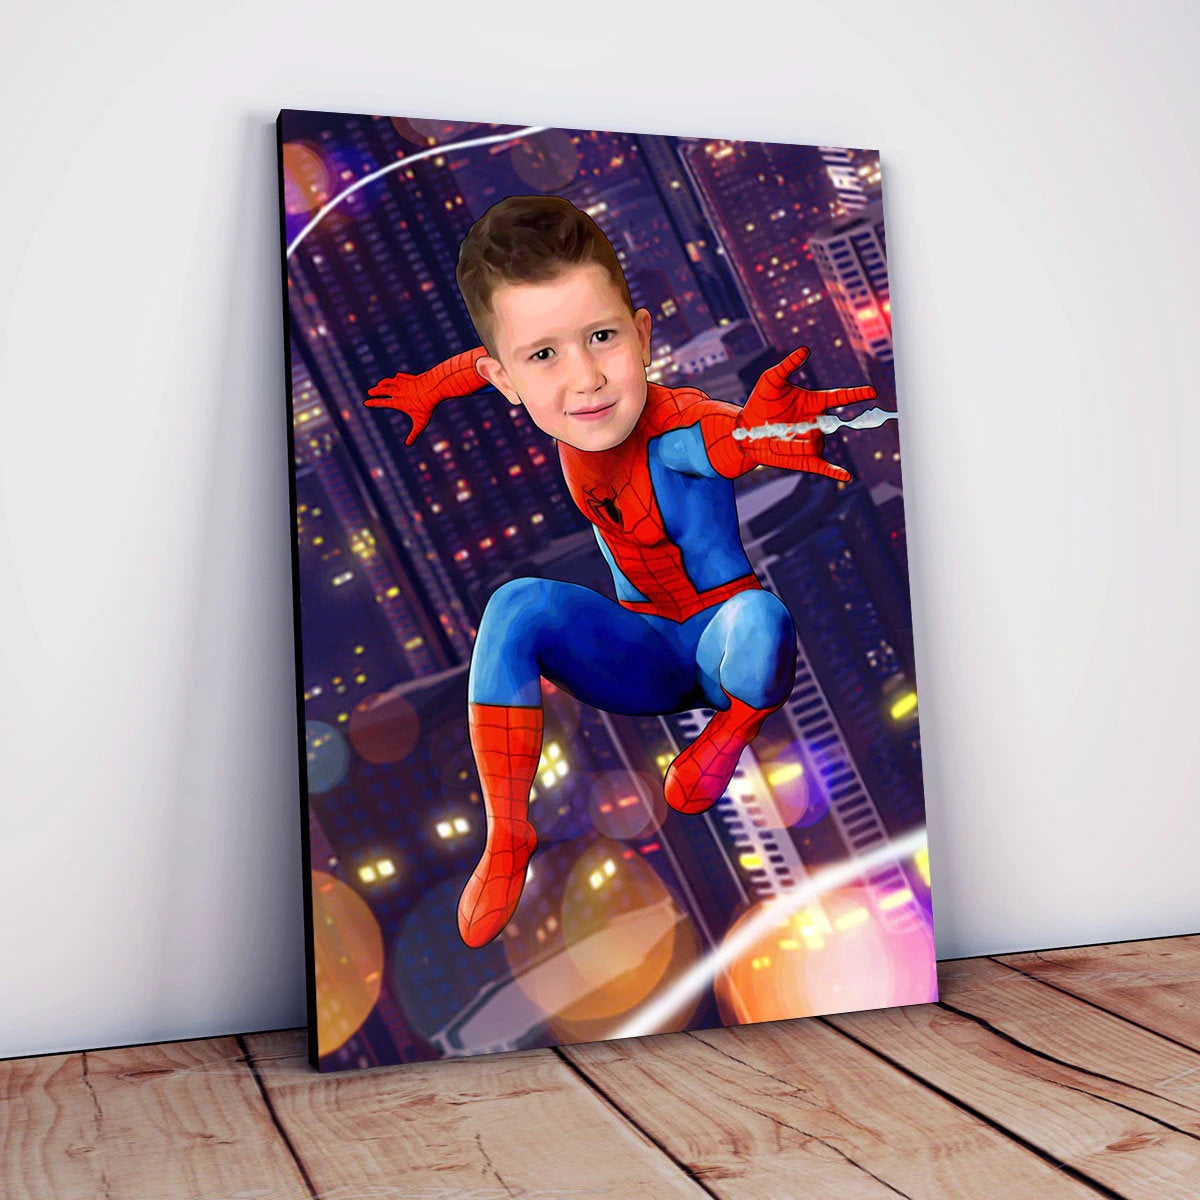 Let your child's imagination soar with our personalized Batman photo gift.